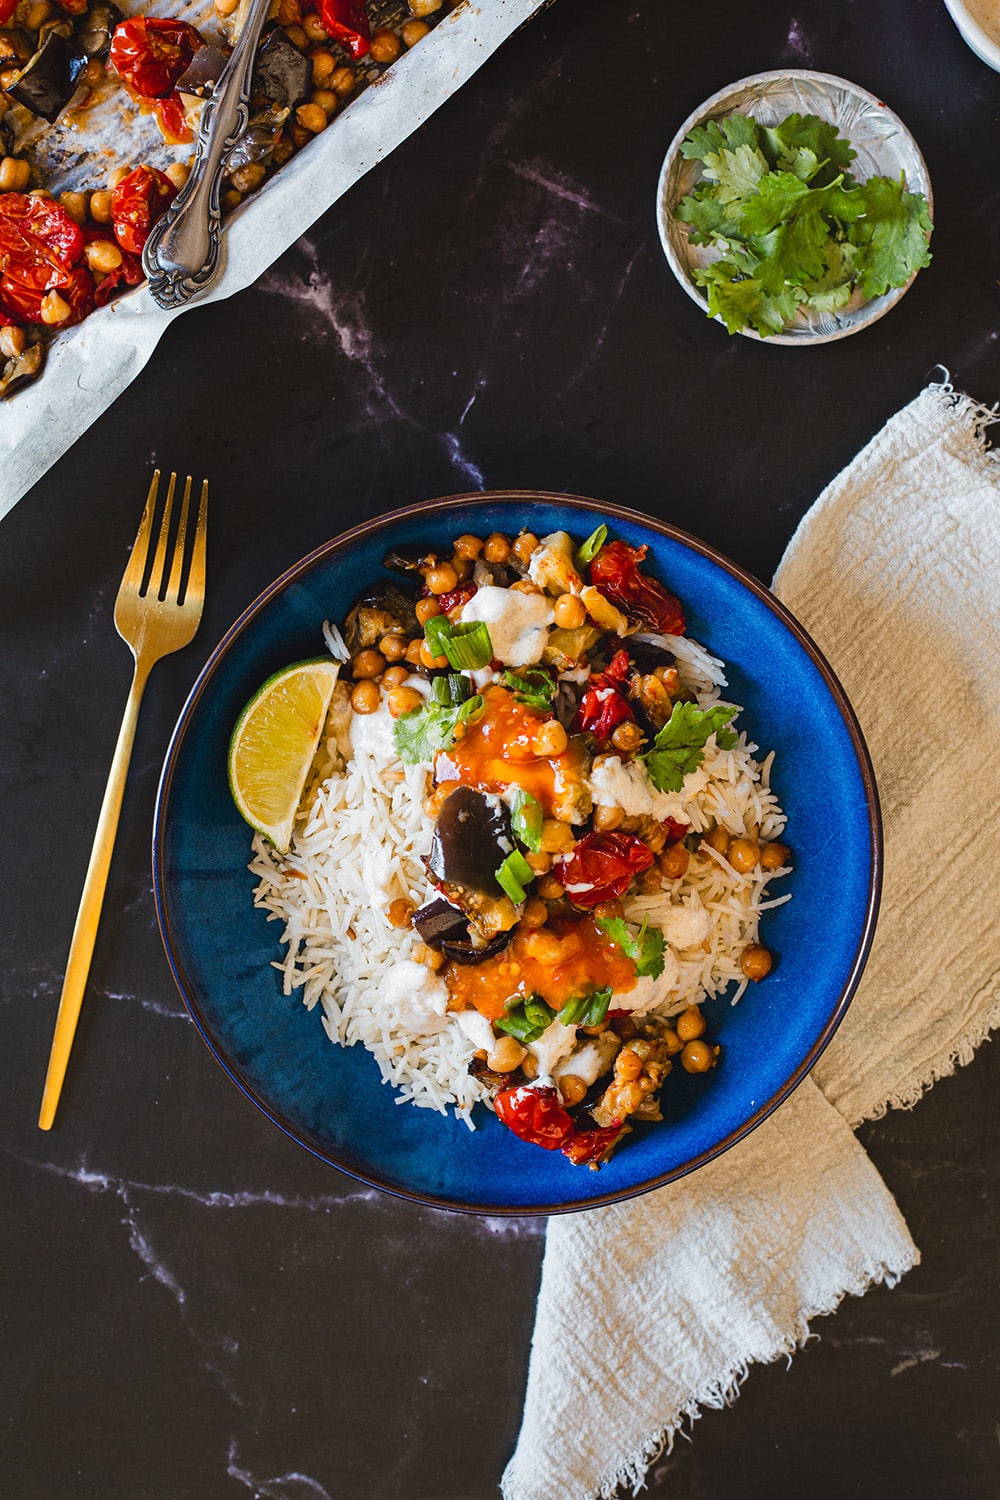 Eggplant and Chickpea Rice Bowl Recipe with Sky Valley Sambal Oelek chili paste